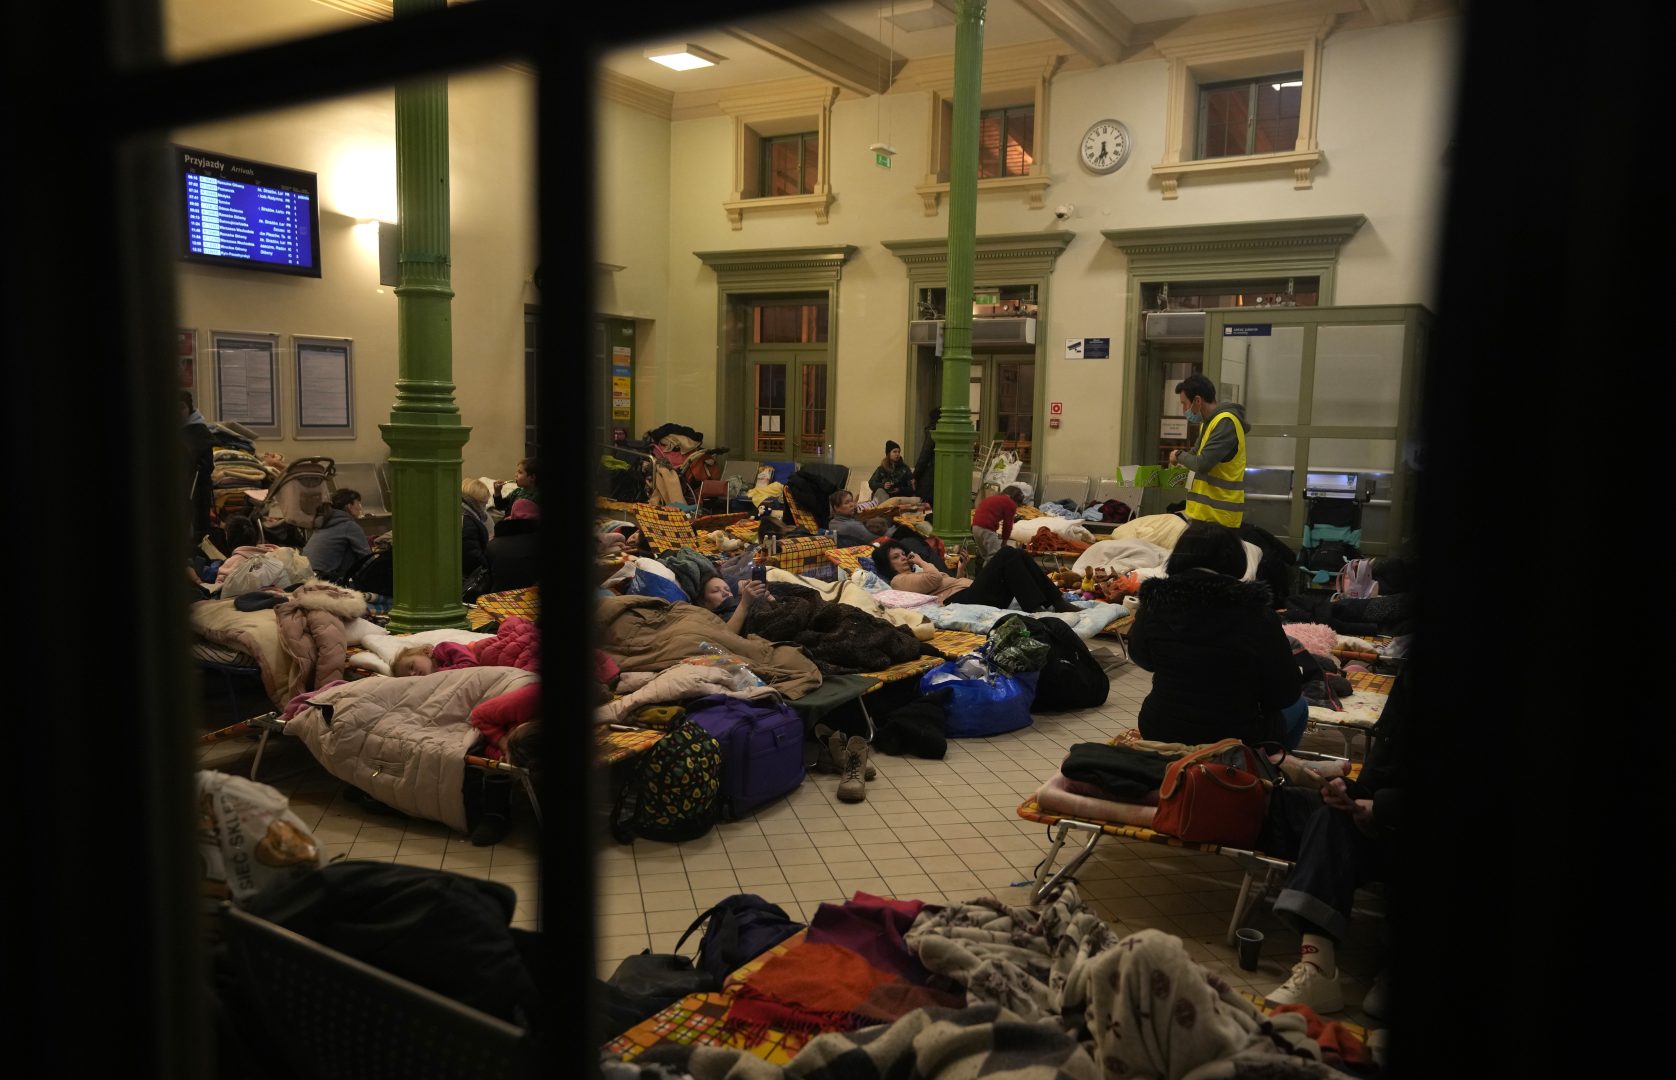 Women and children, fleeing from Ukraine, sleep at a makeshift shelter in the train station in Przemysl, Poland, Thursday, March 3, 2022. More than 1 million people have fled Ukraine following Russia's invasion in the swiftest refugee exodus in this century, the United Nations said Thursday. 